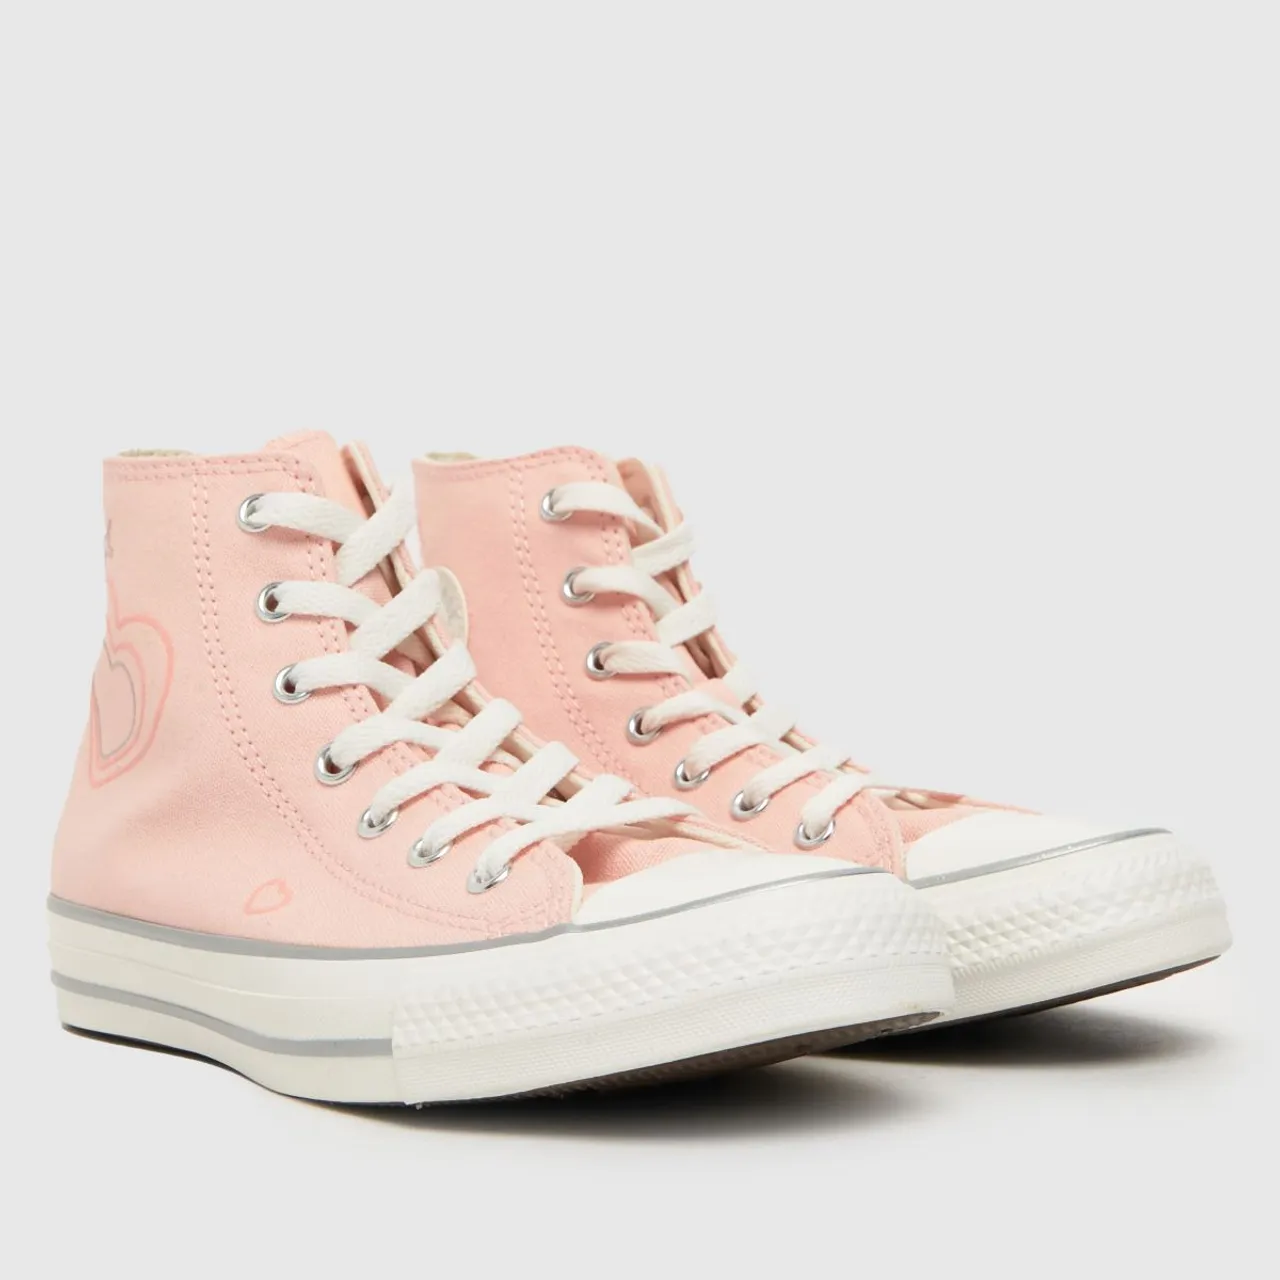 Converse Pale Pink All Star Hi Yth Girls Youth Trainers